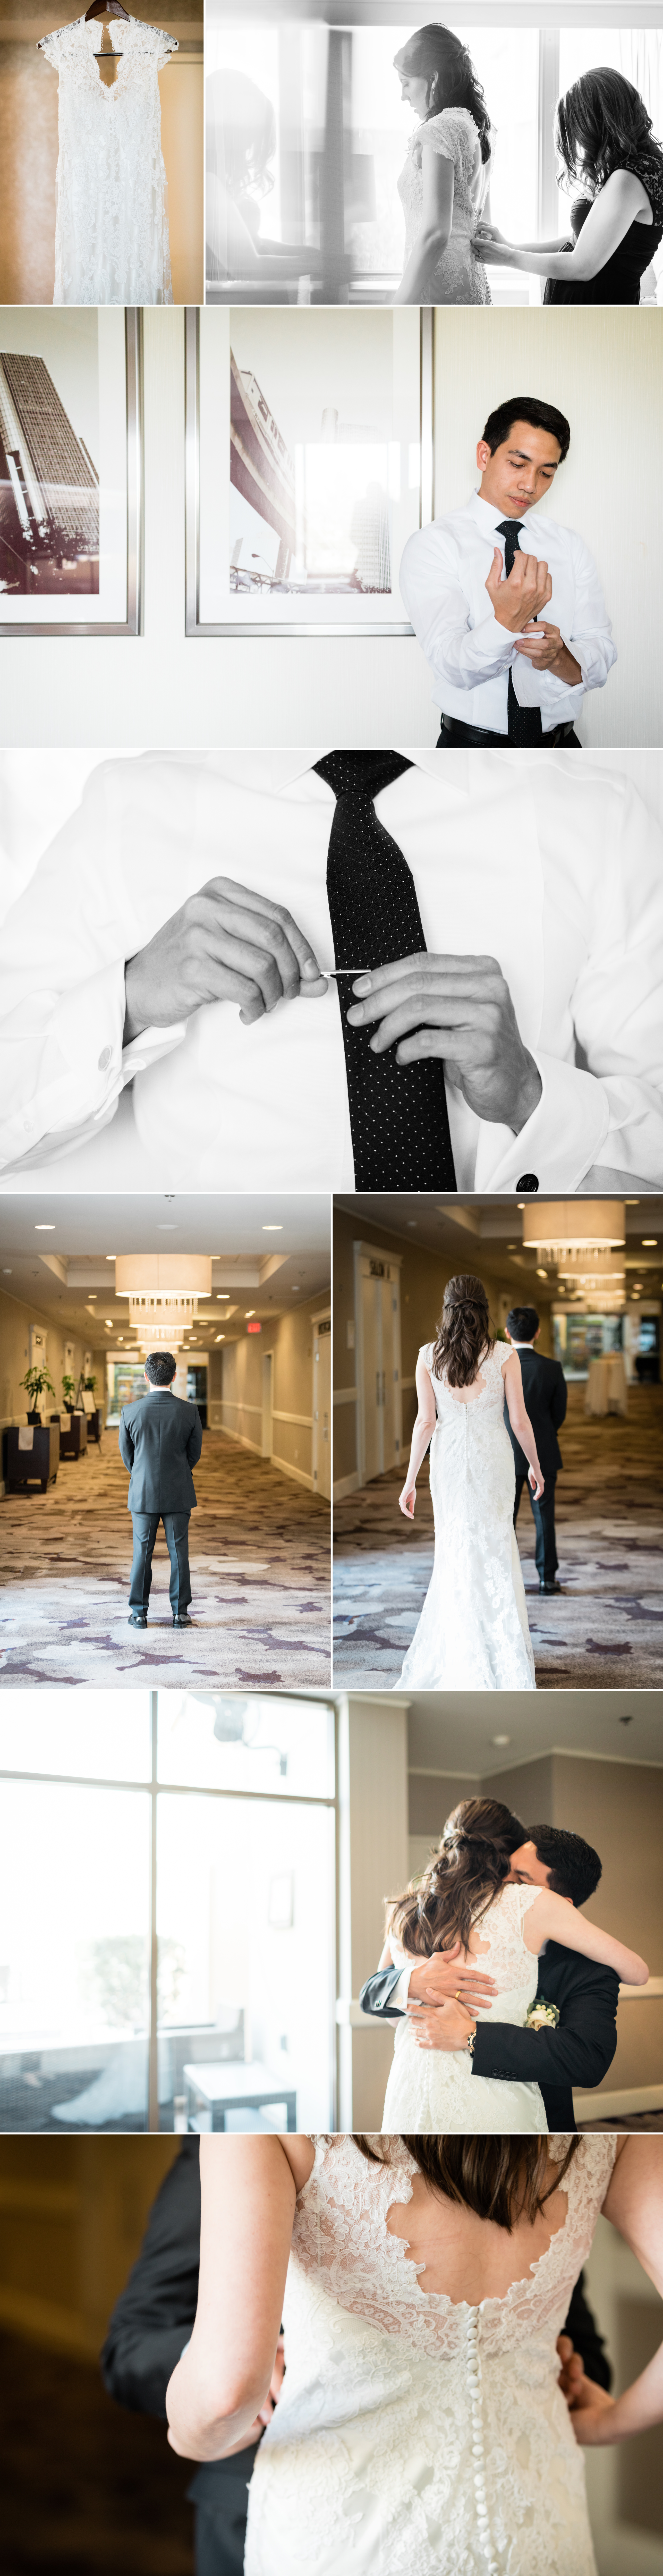 Photo collage of bride and groom getting ready for their first look at an Intimate Wedding in Livonia